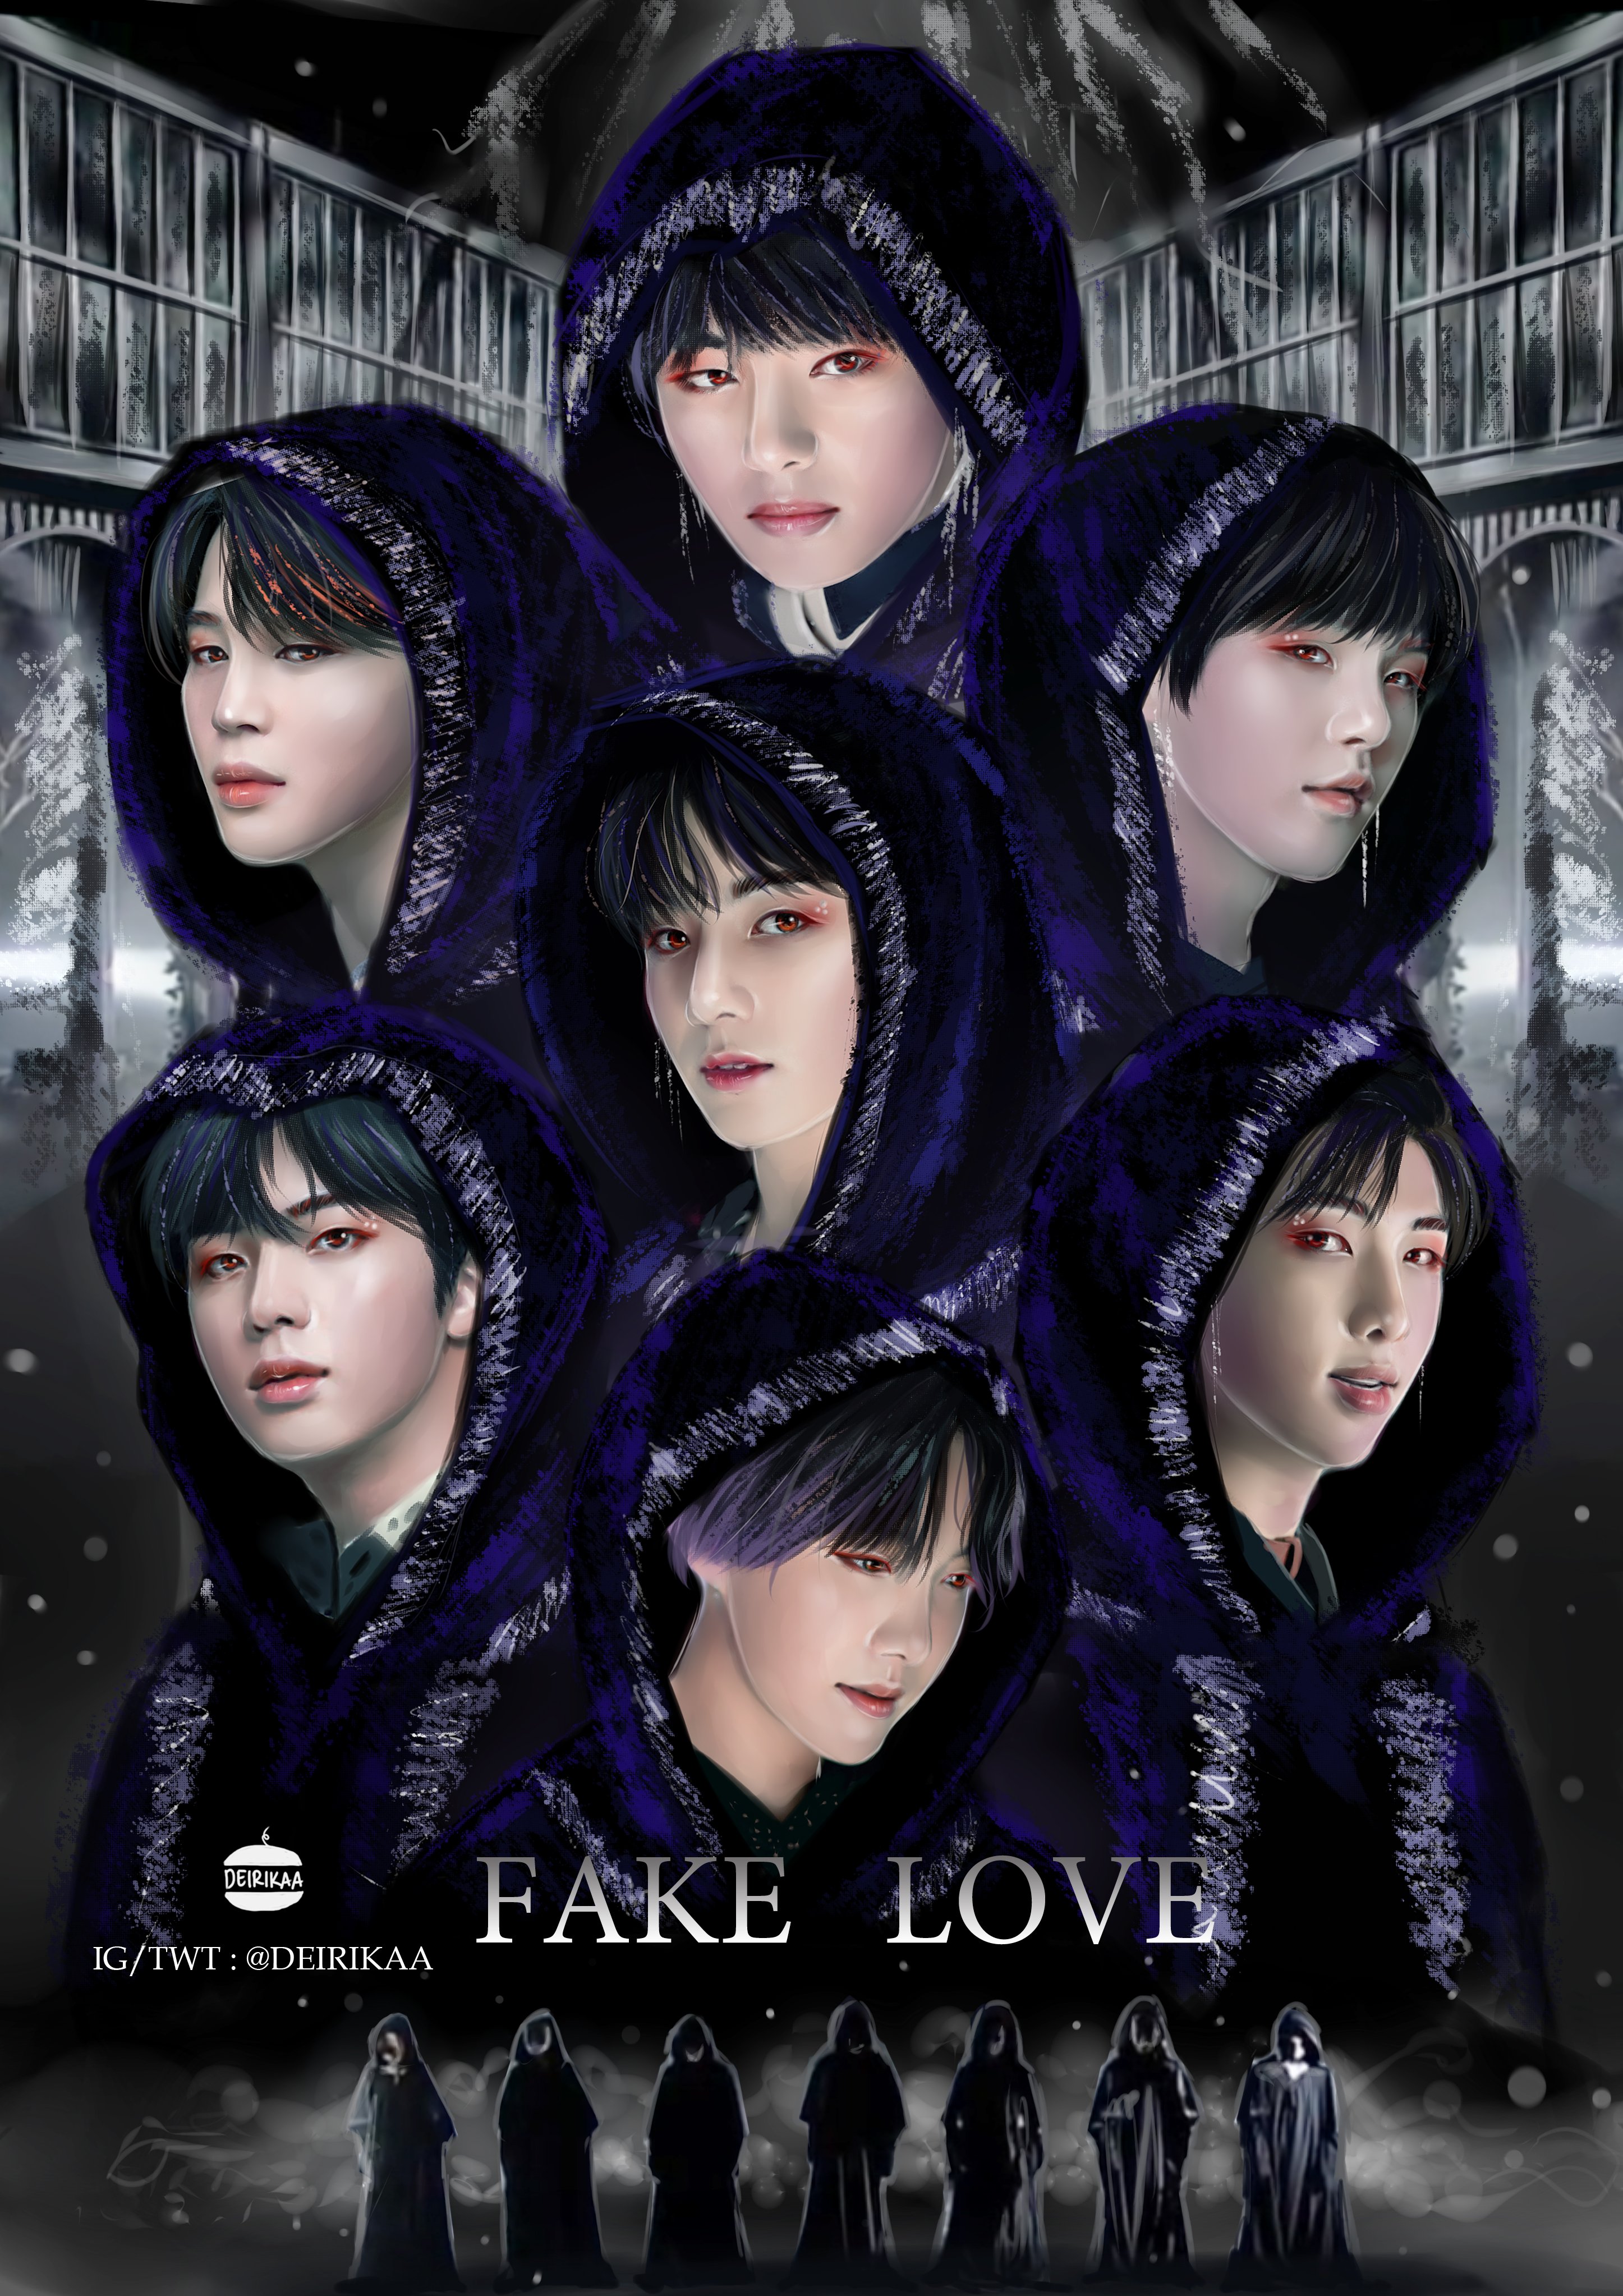 Bts Fake Love Wallpaper 97 images in Collection Page 3